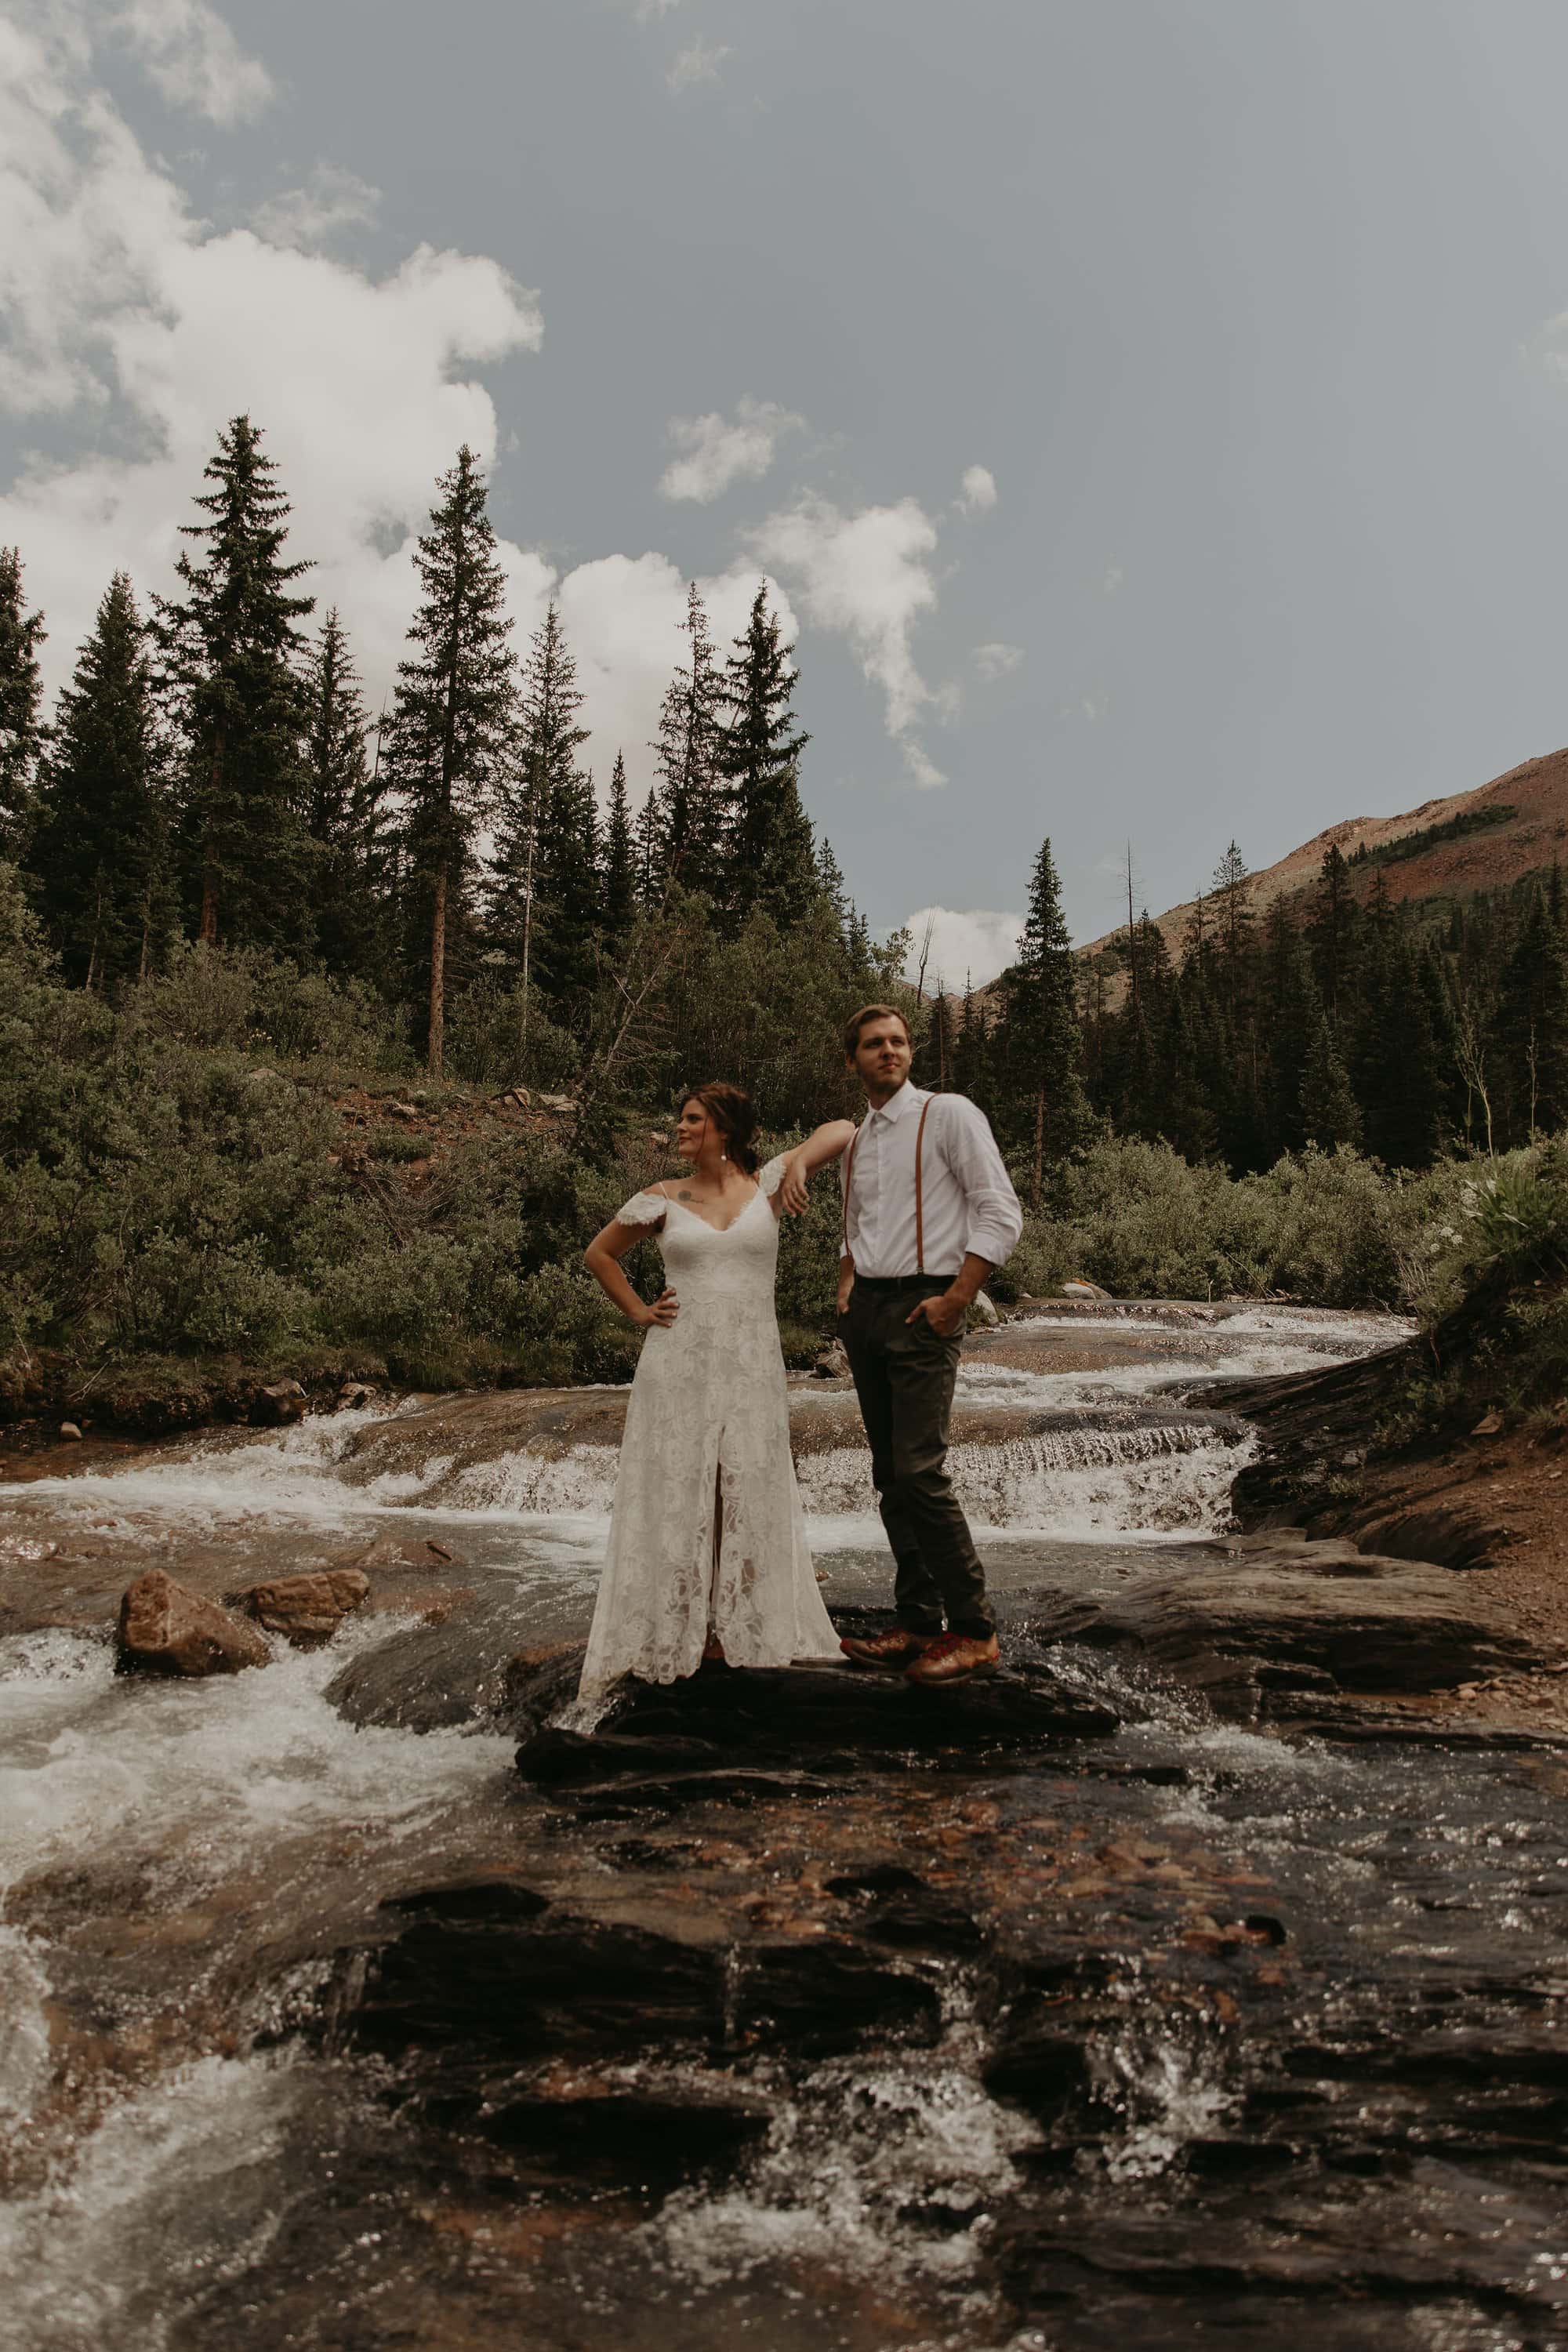 Couple walking barefoot through a river in their wedding clothes